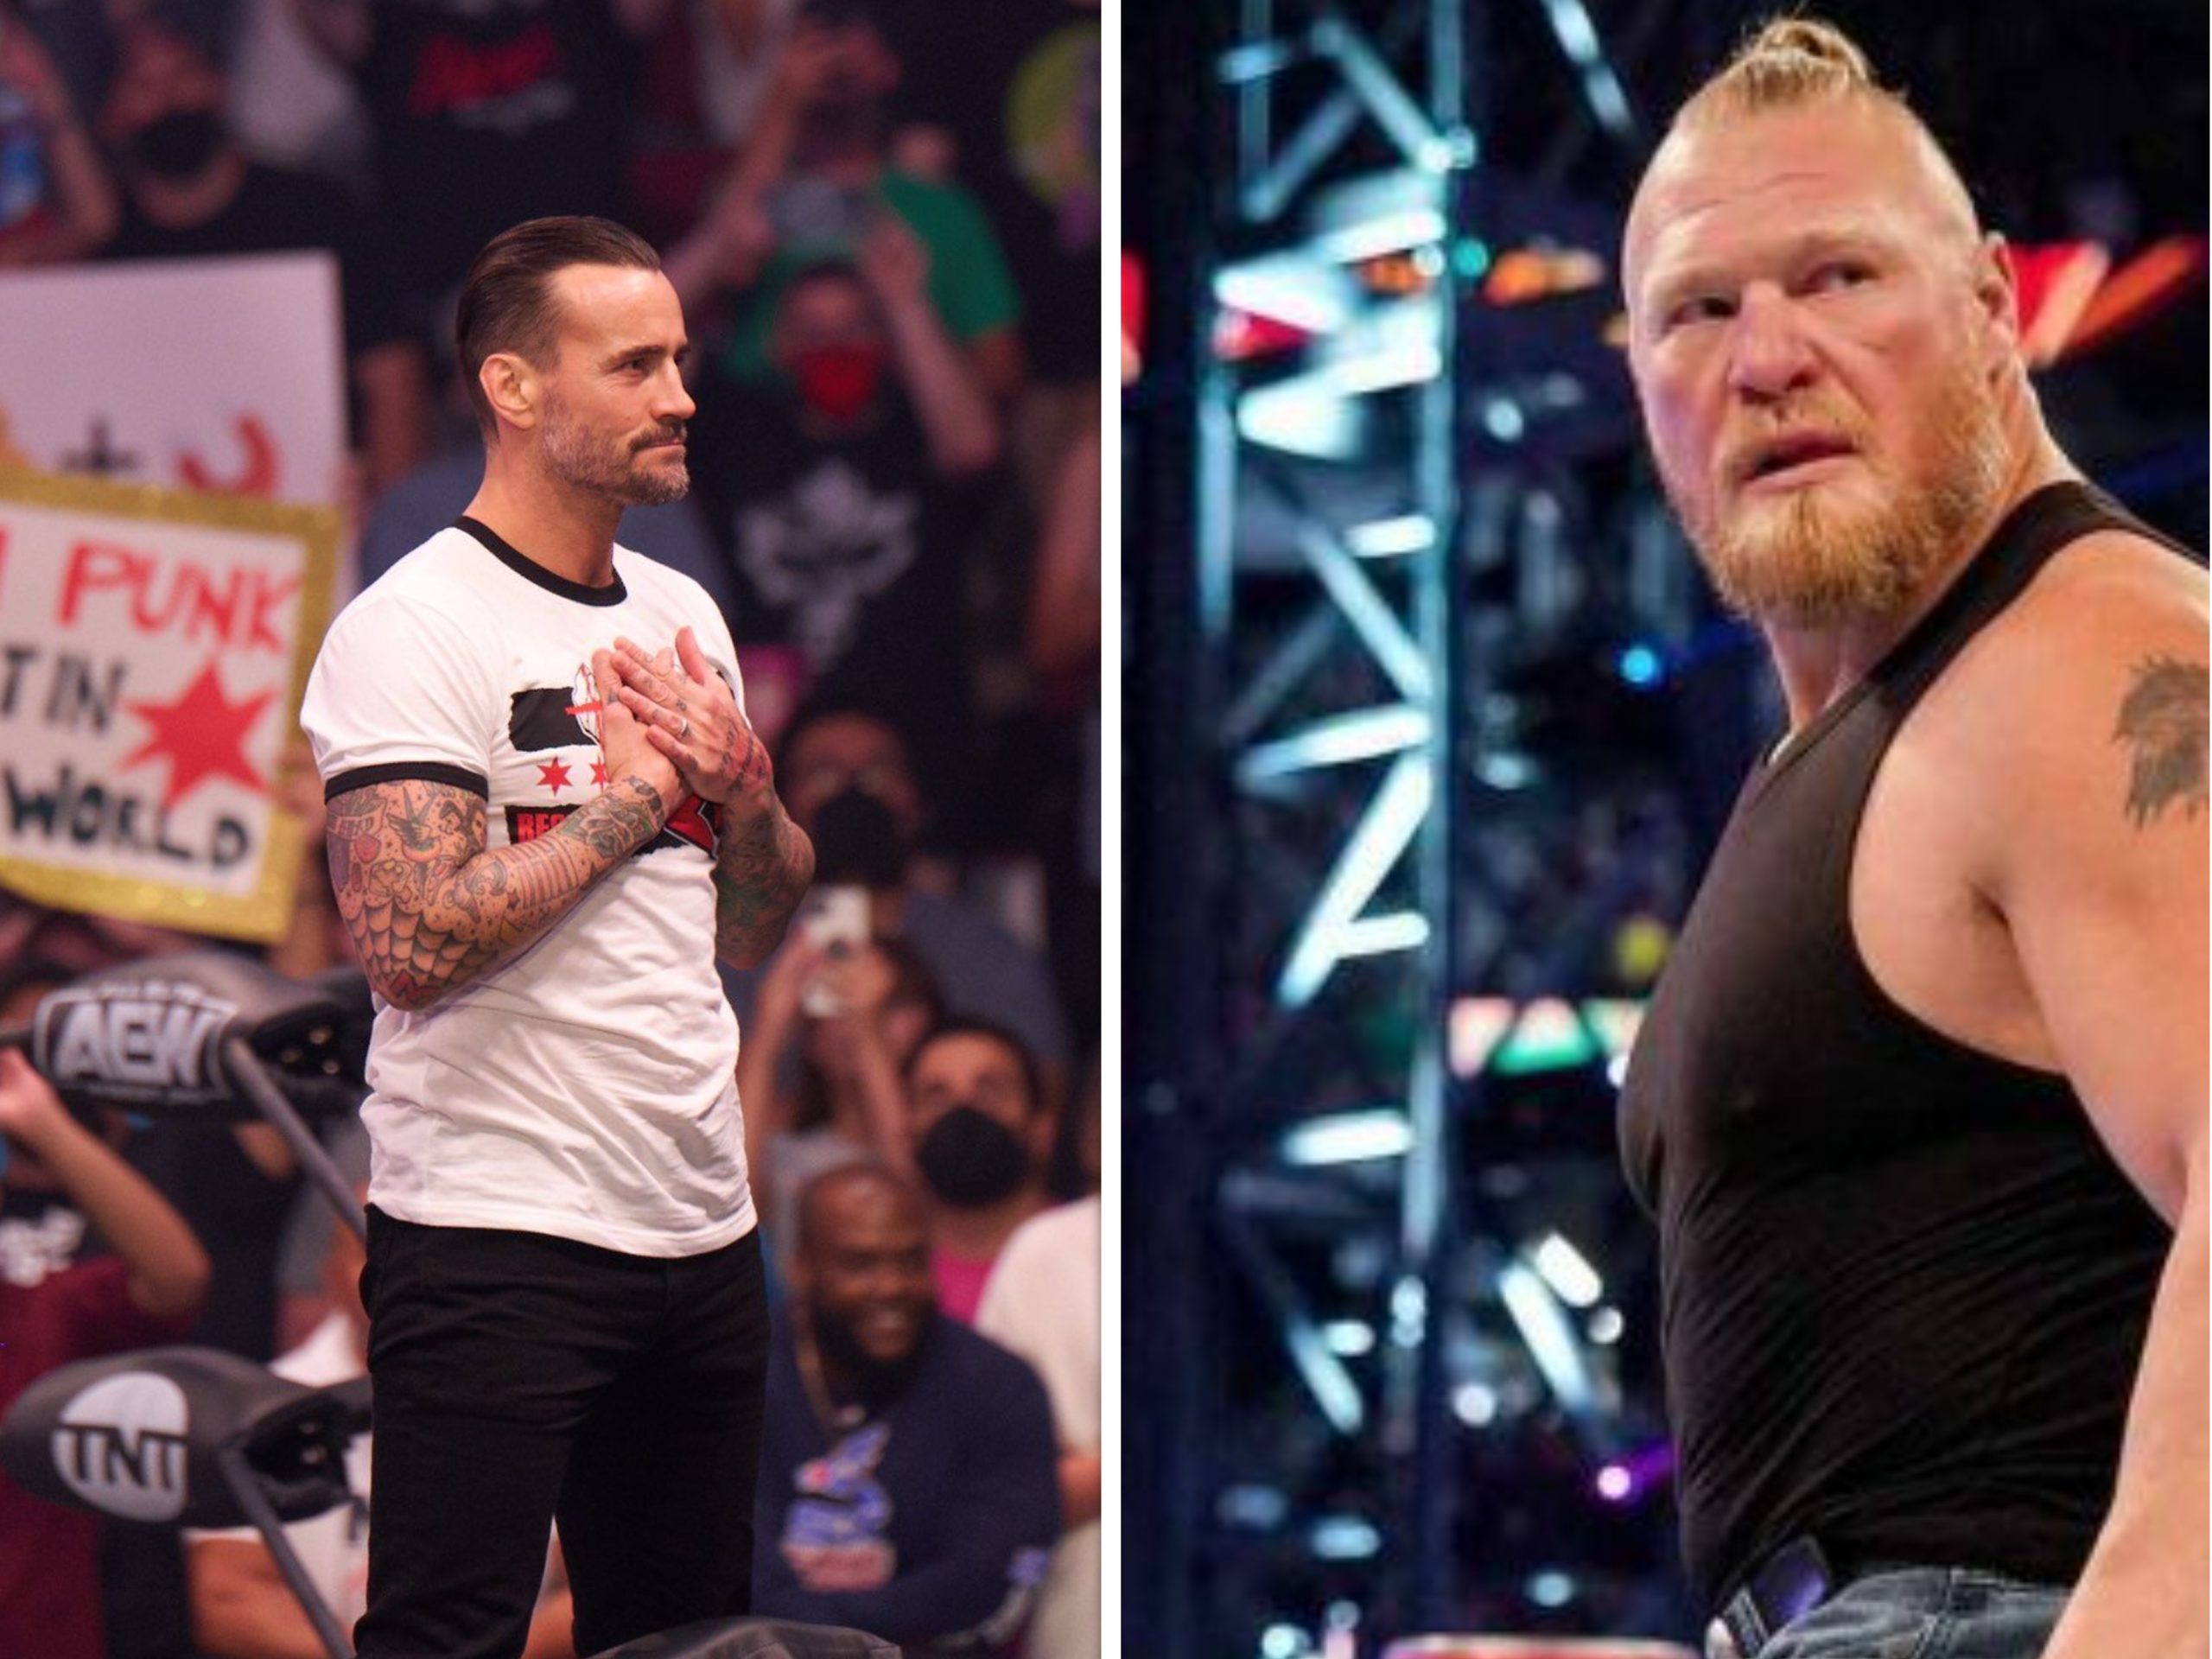 WWE News: Was Brock Lesnar made to return to ruin CM Punk's AEW debut buzz? Check details